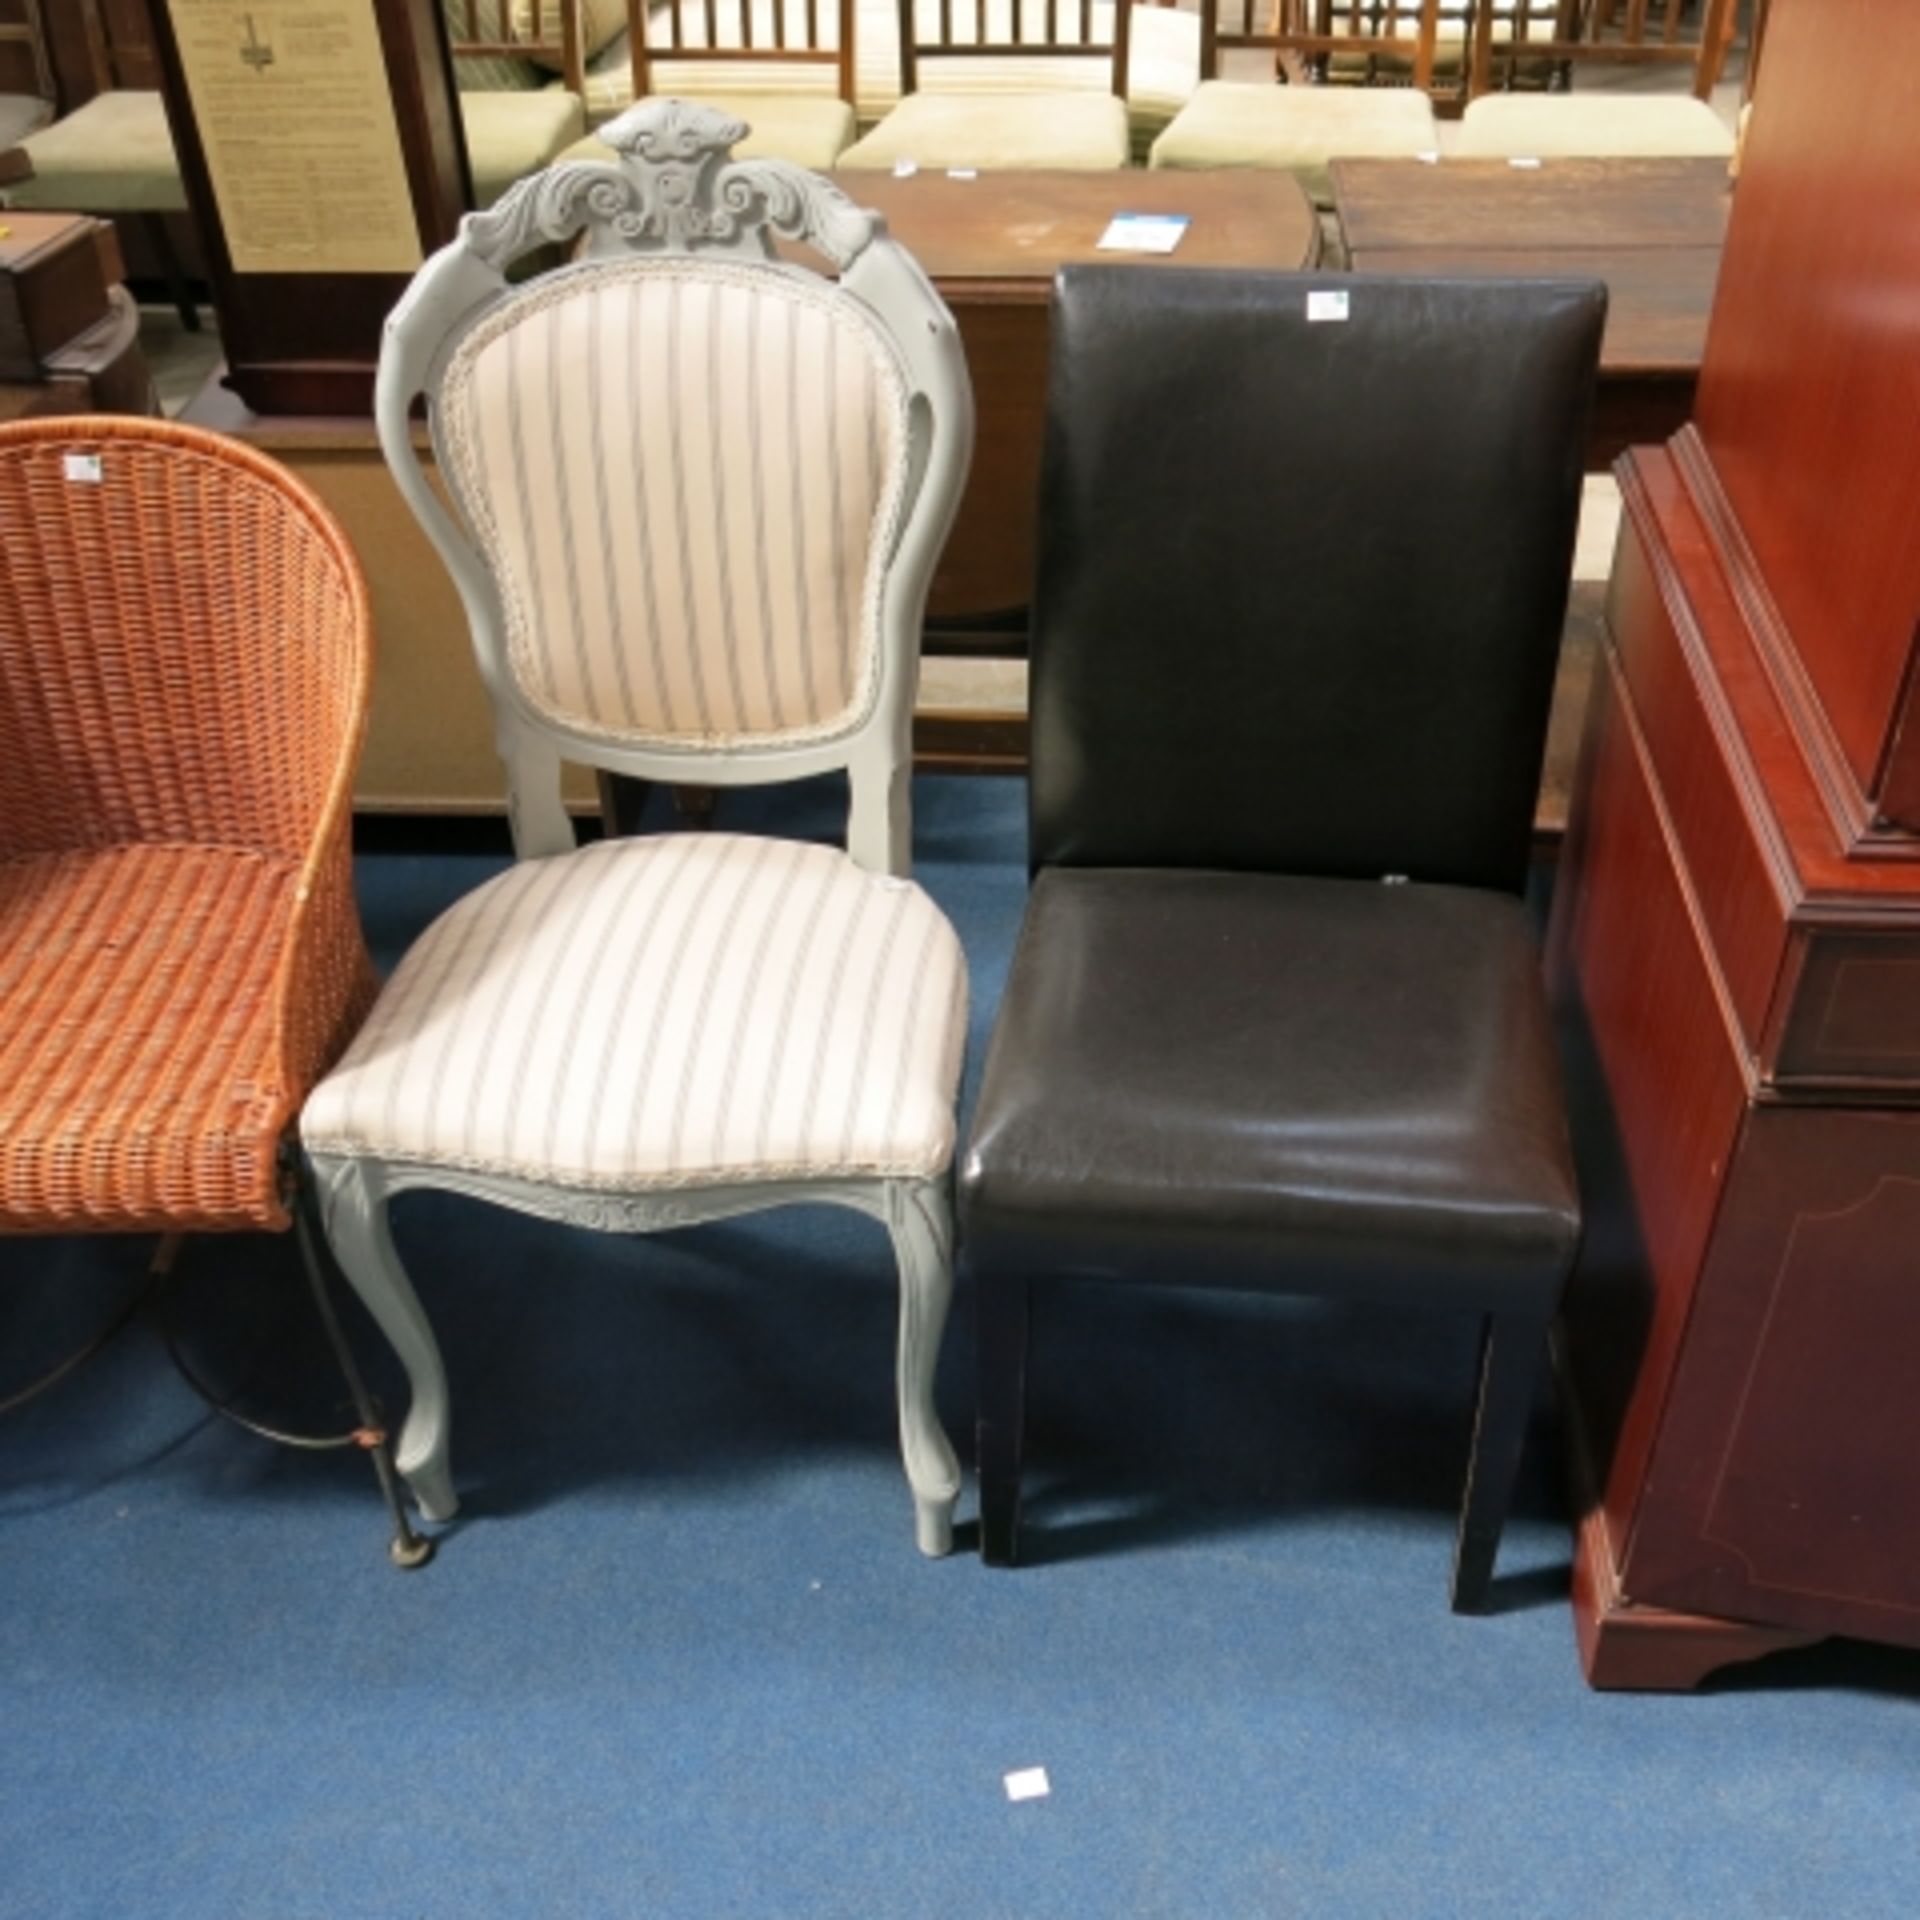 Four various chairs- two different faux leather high back singles, a painted French style salon